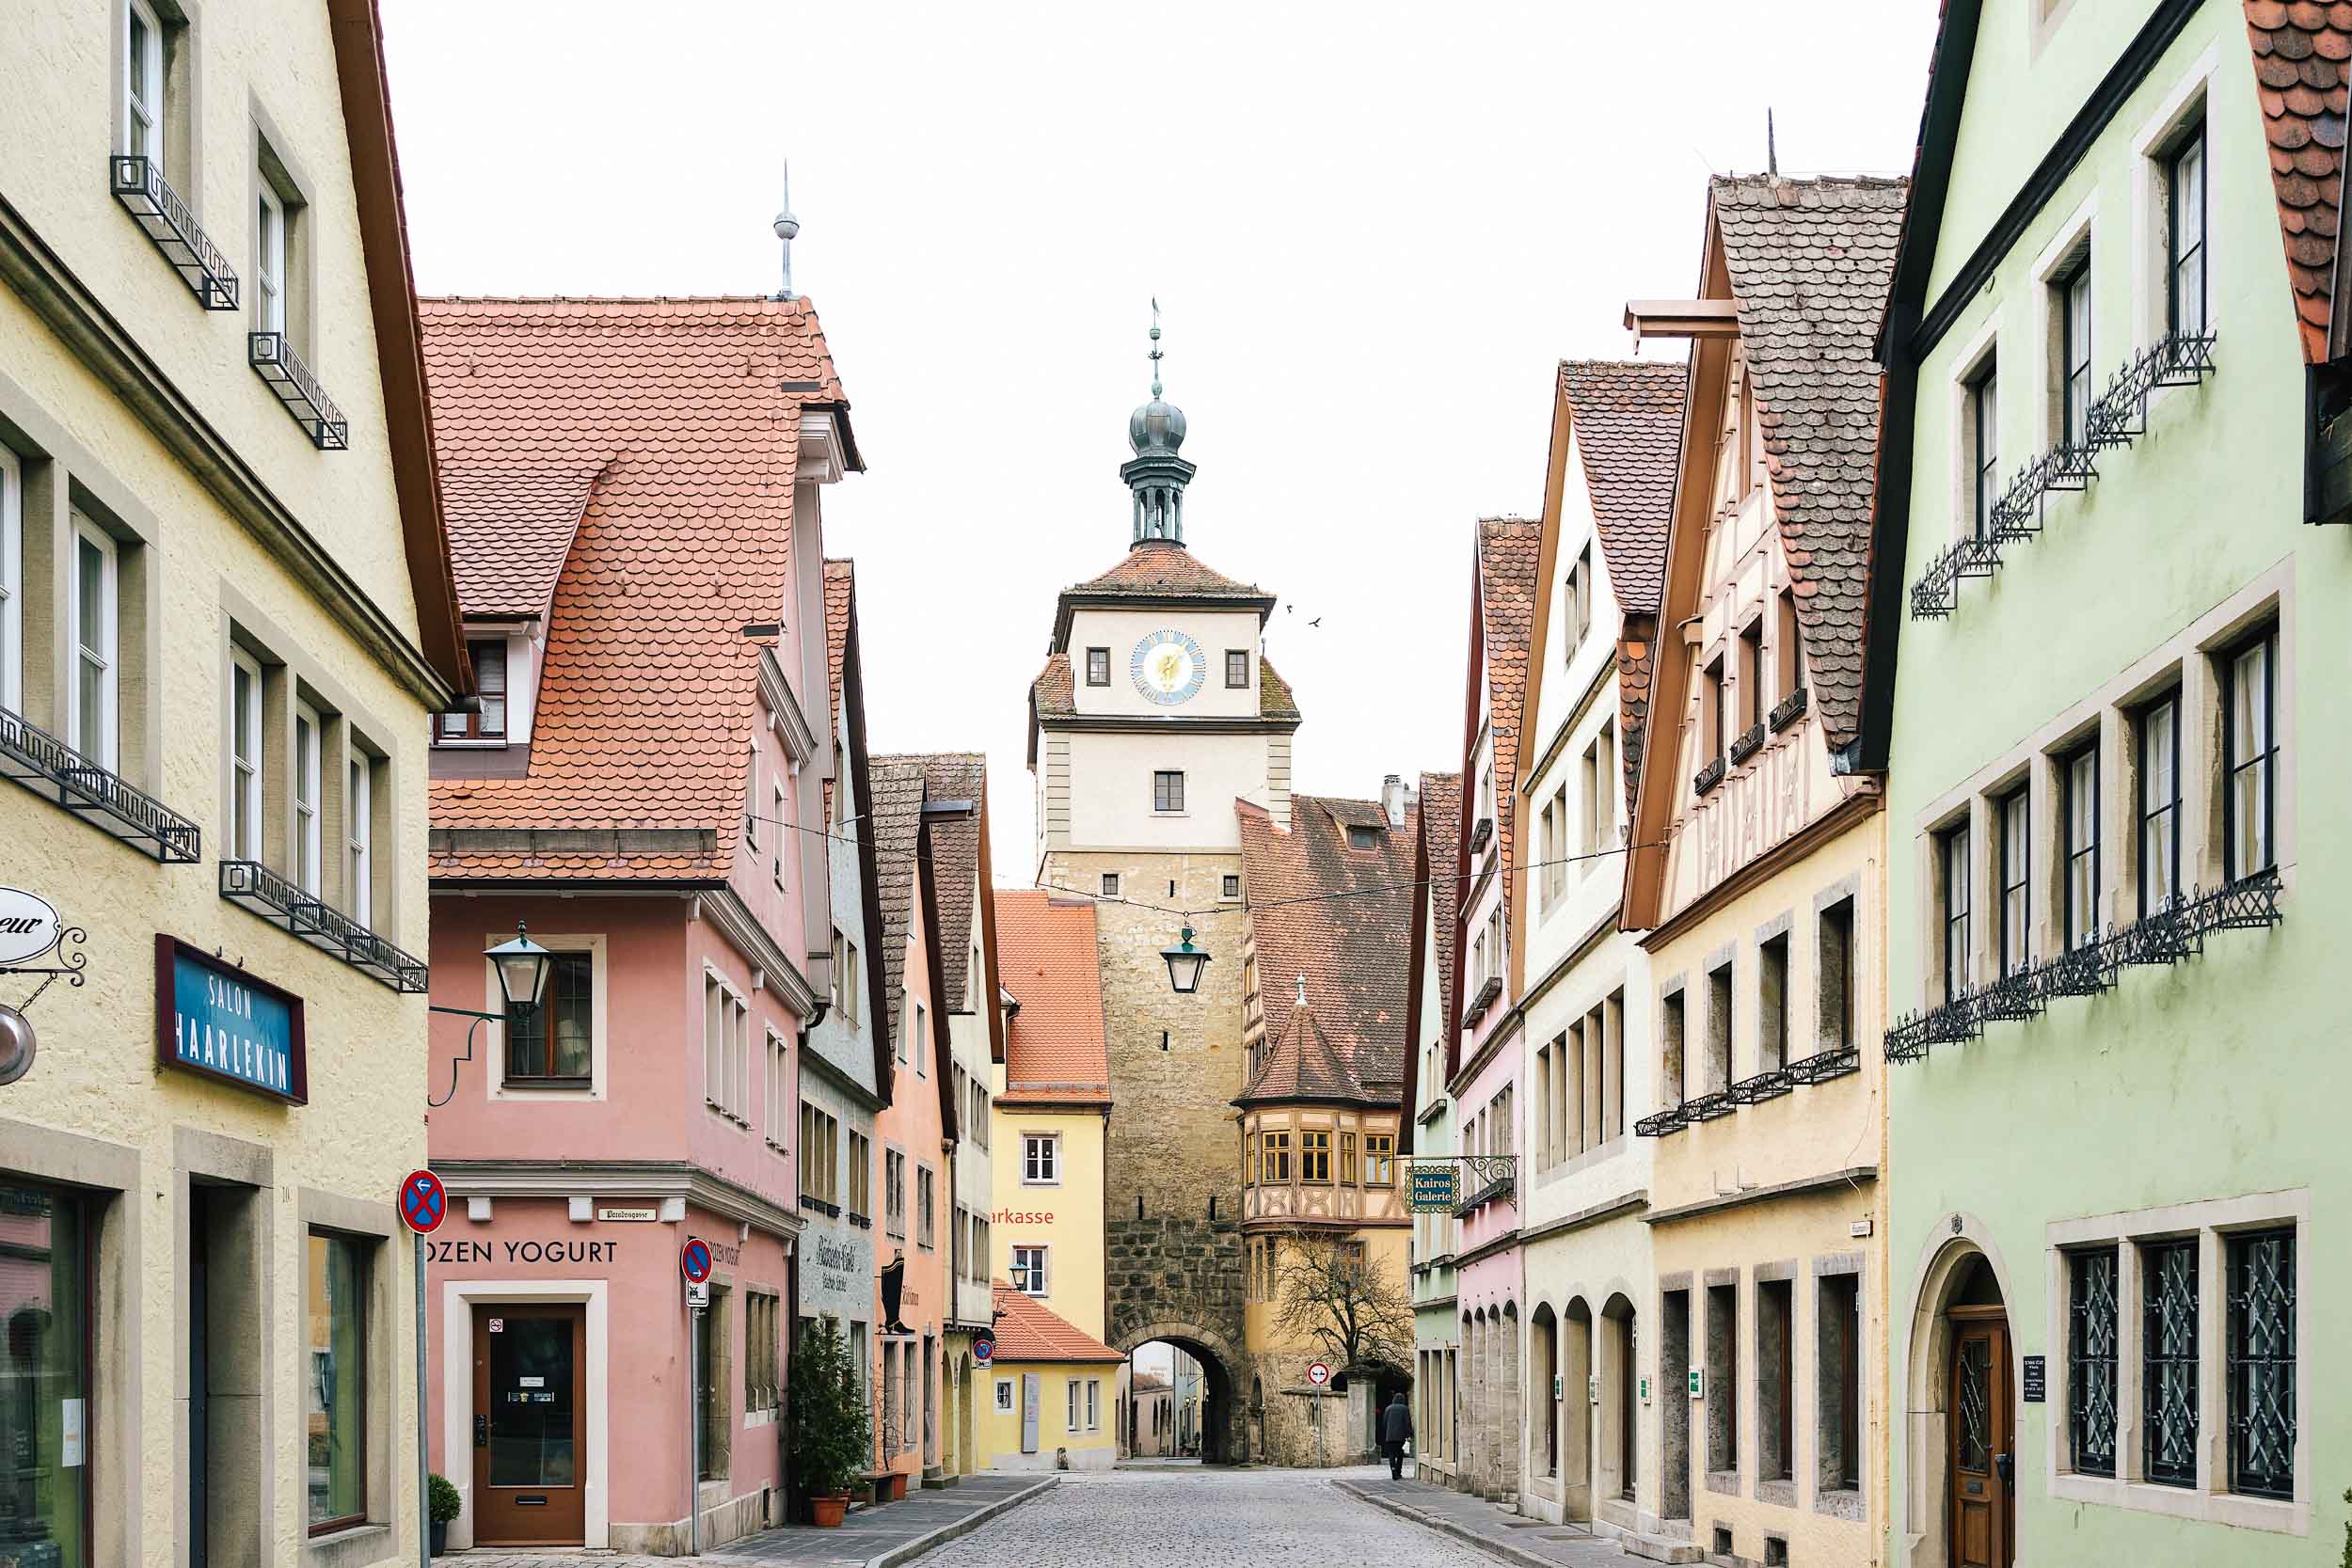 Rothenburg is a well preserved medieval town in Germany